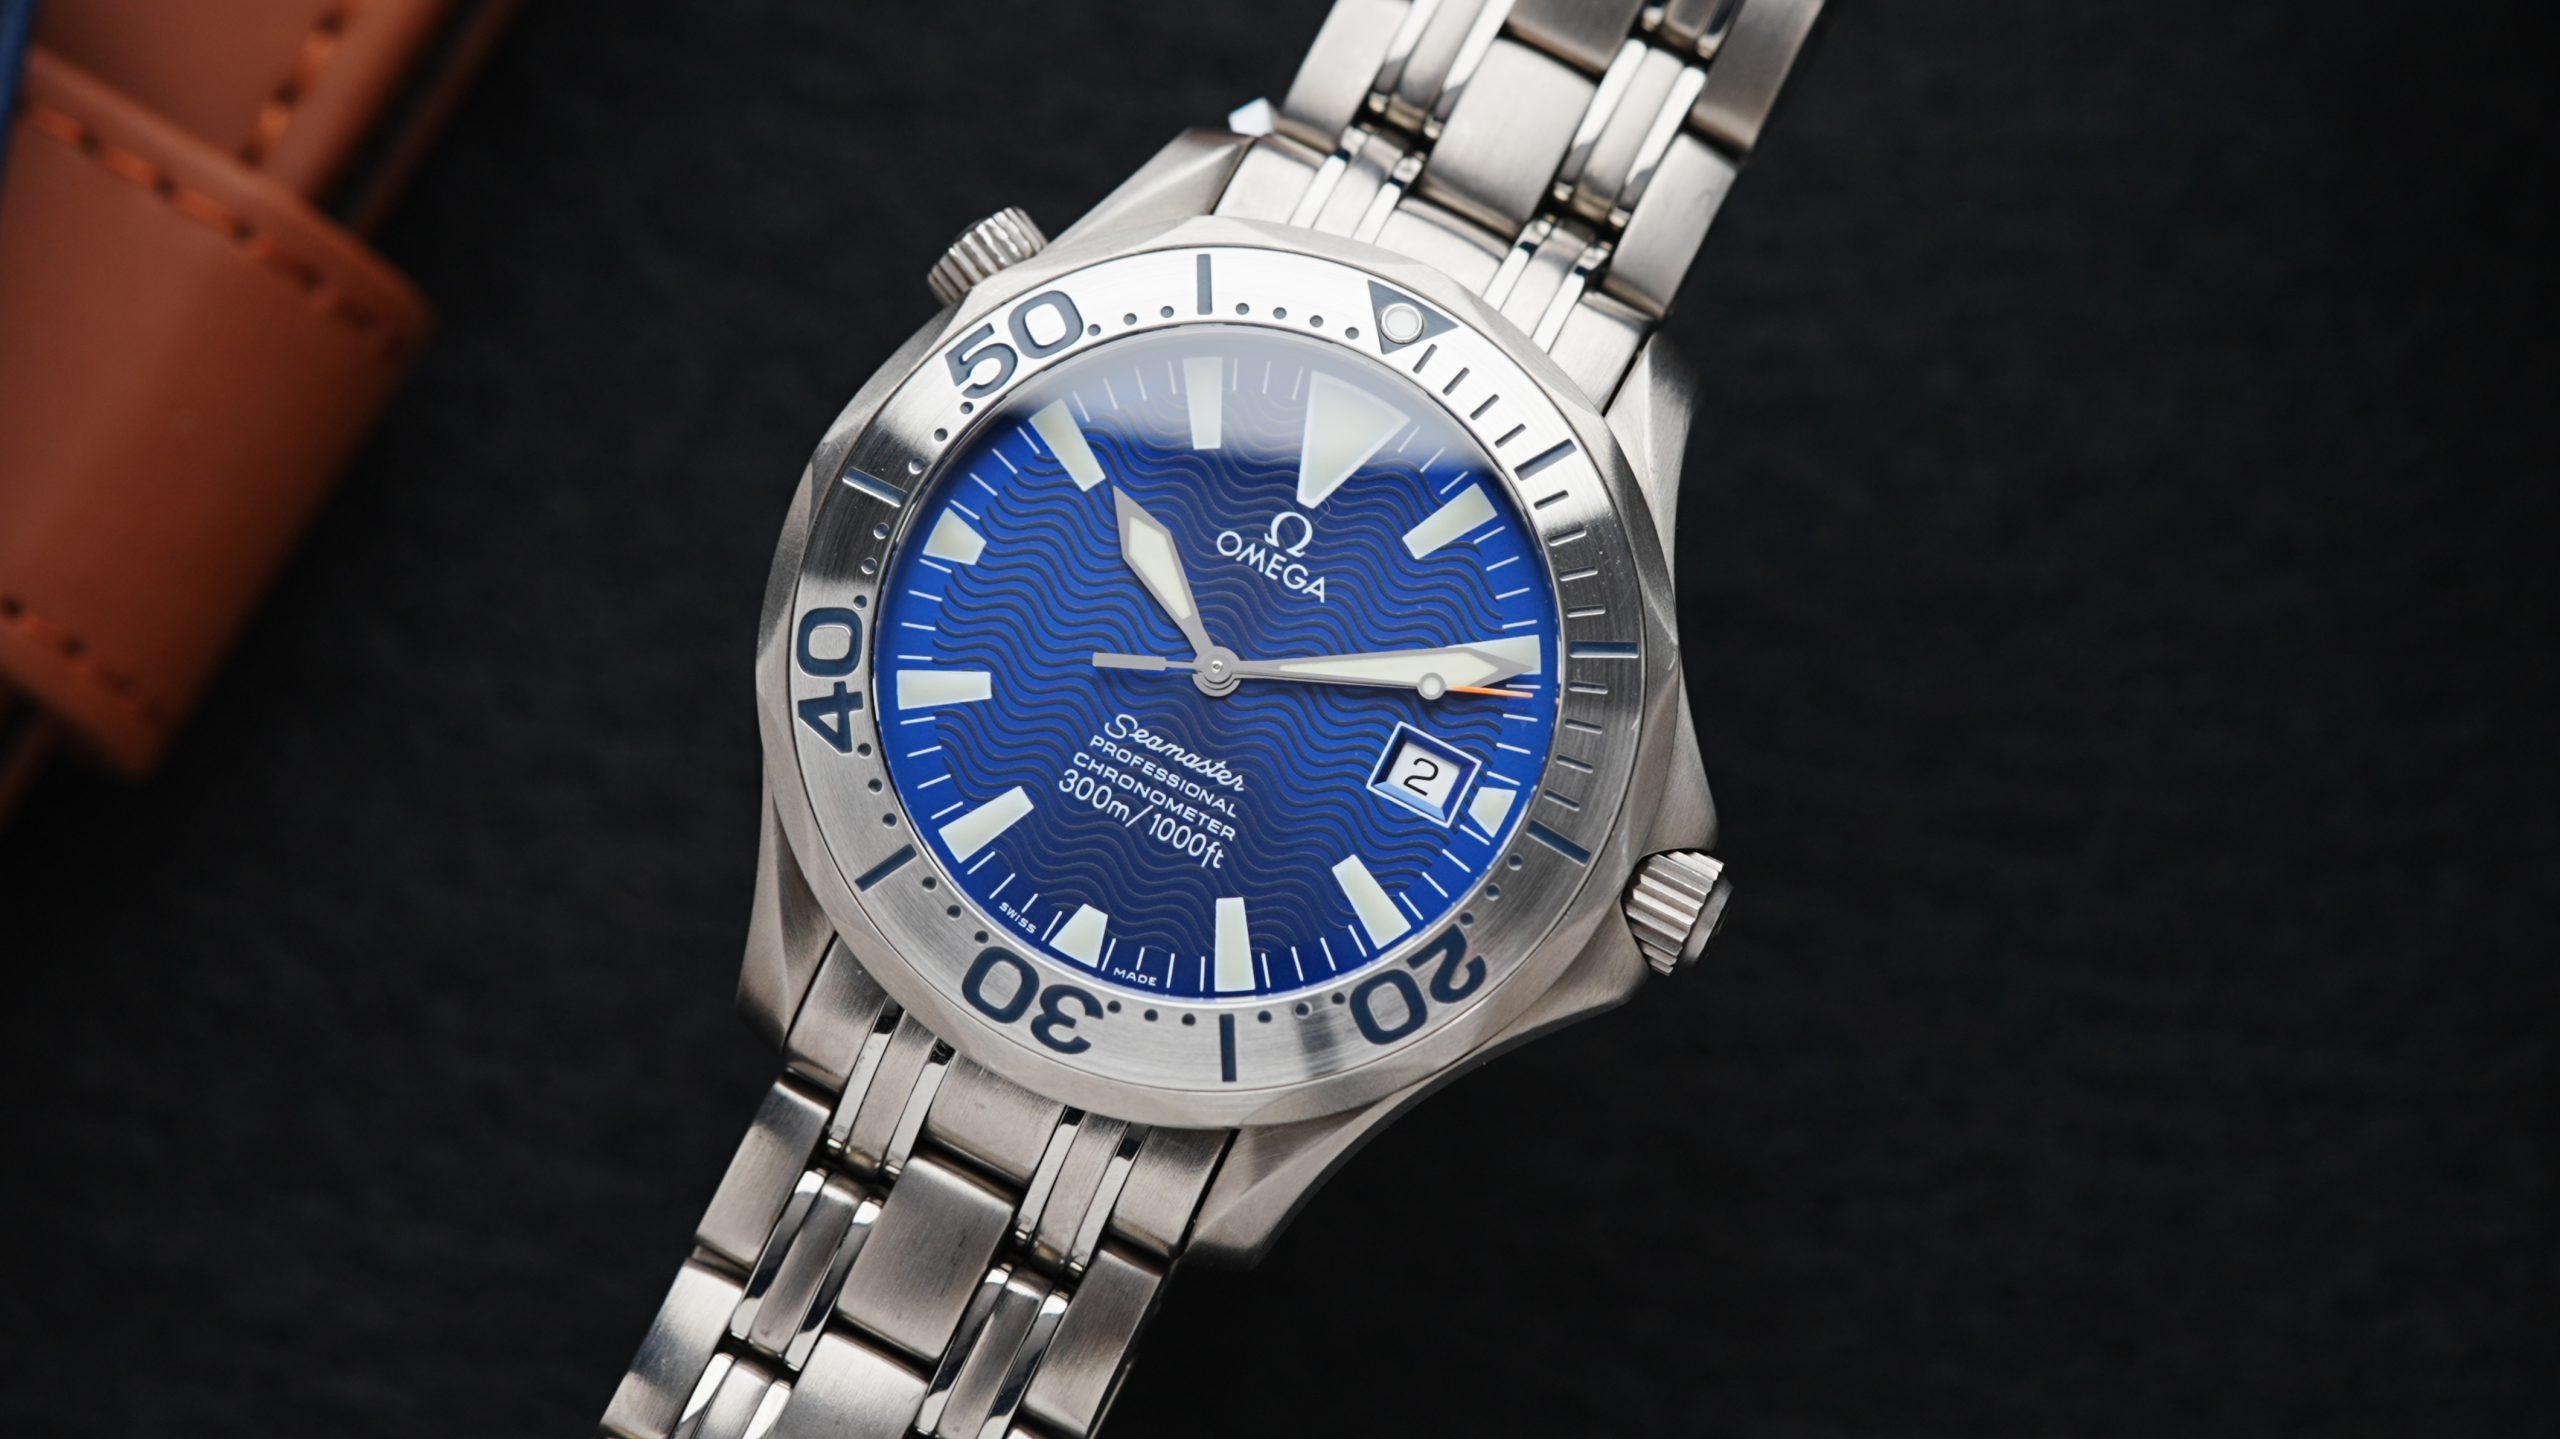 Omega Seamaster Professional 300m Electric Blue with Sword Hands angle shot under white lighting.